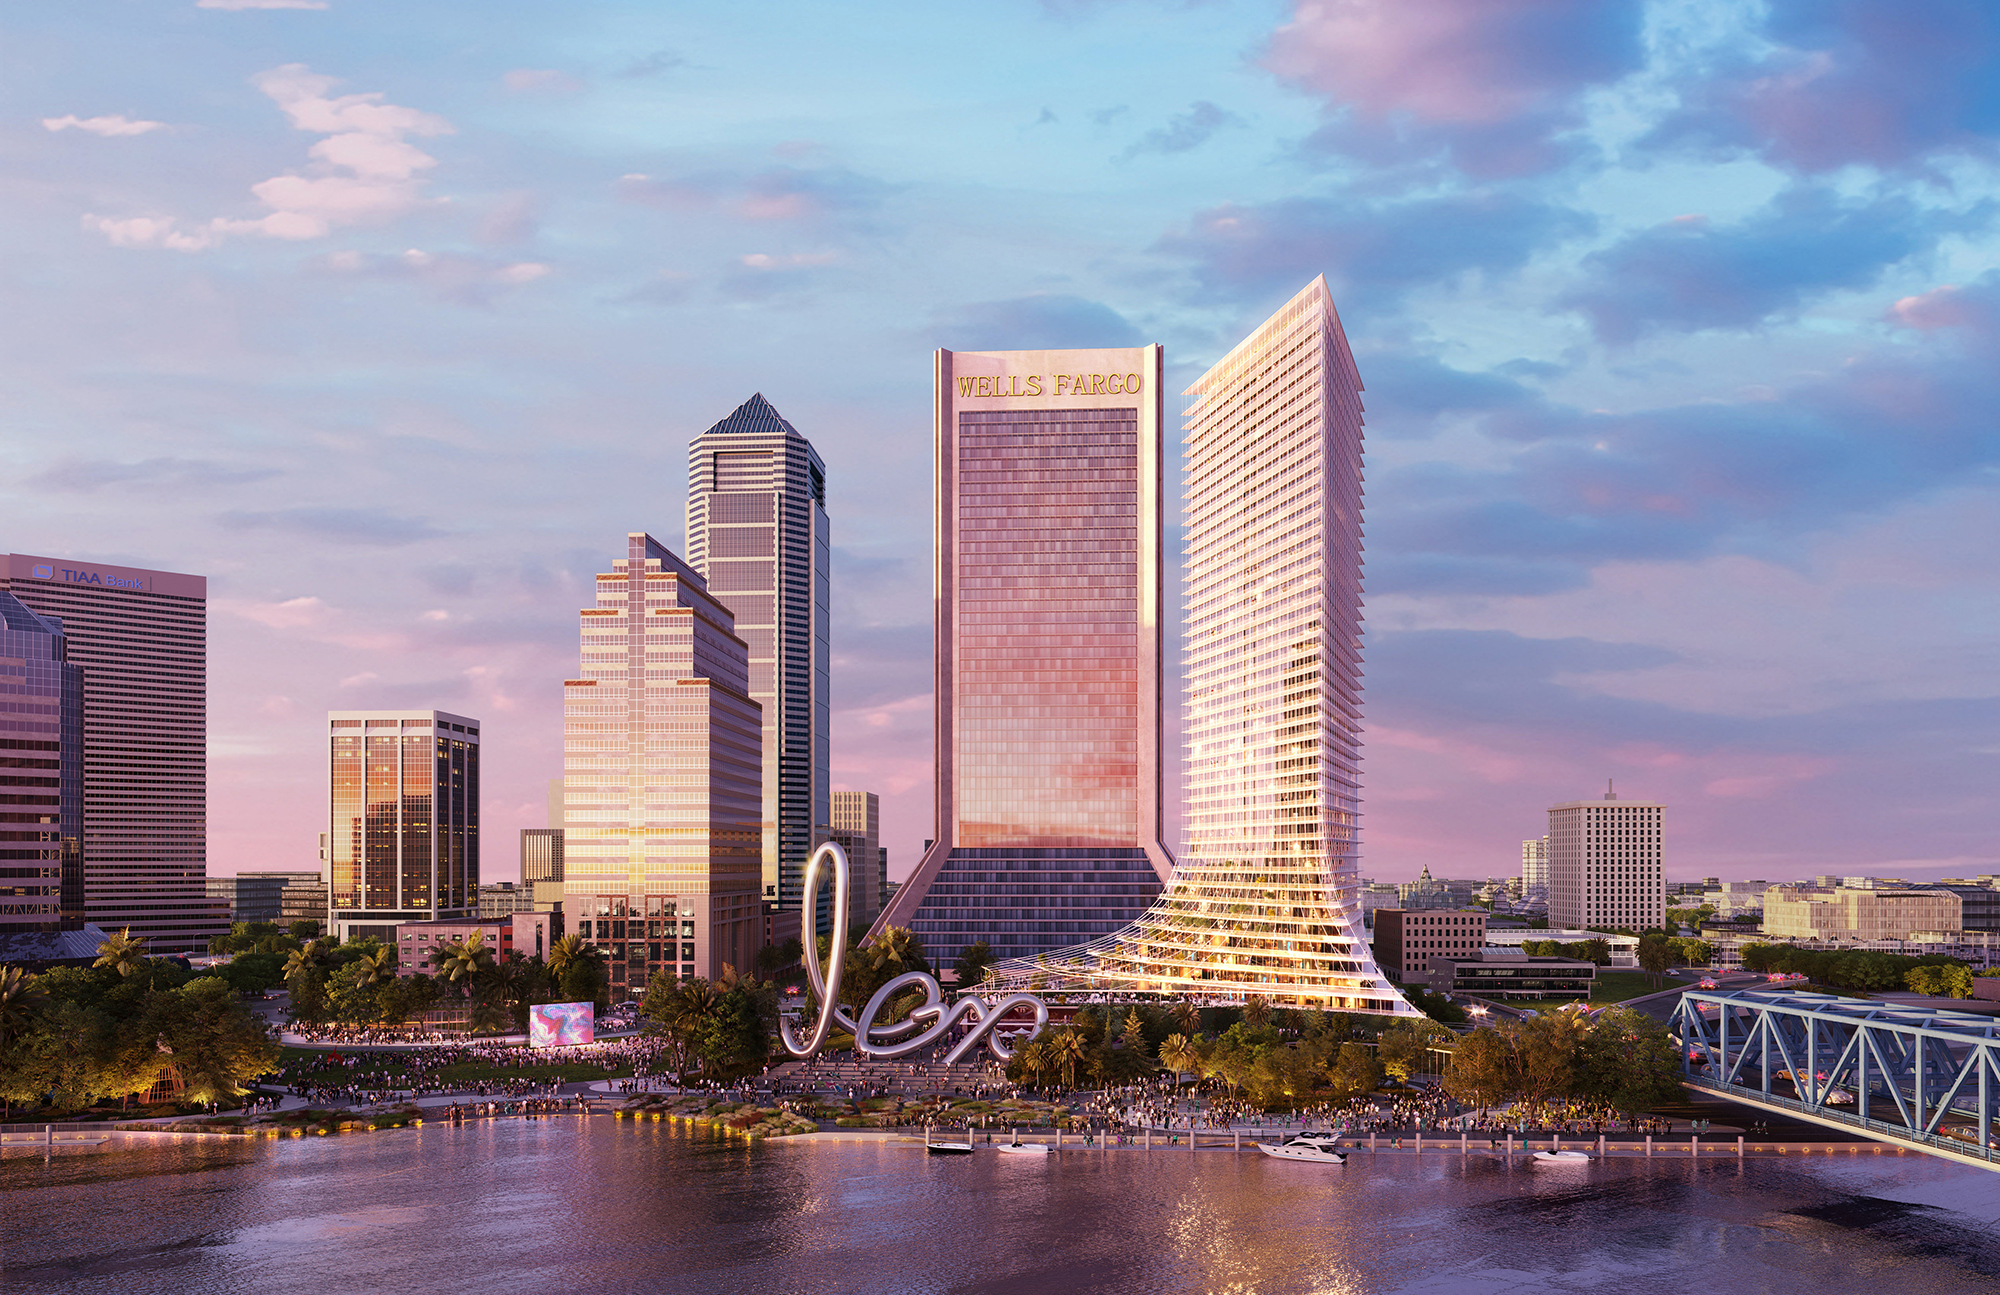 The residential tower would change the skyline of Downtown Jacksonville.